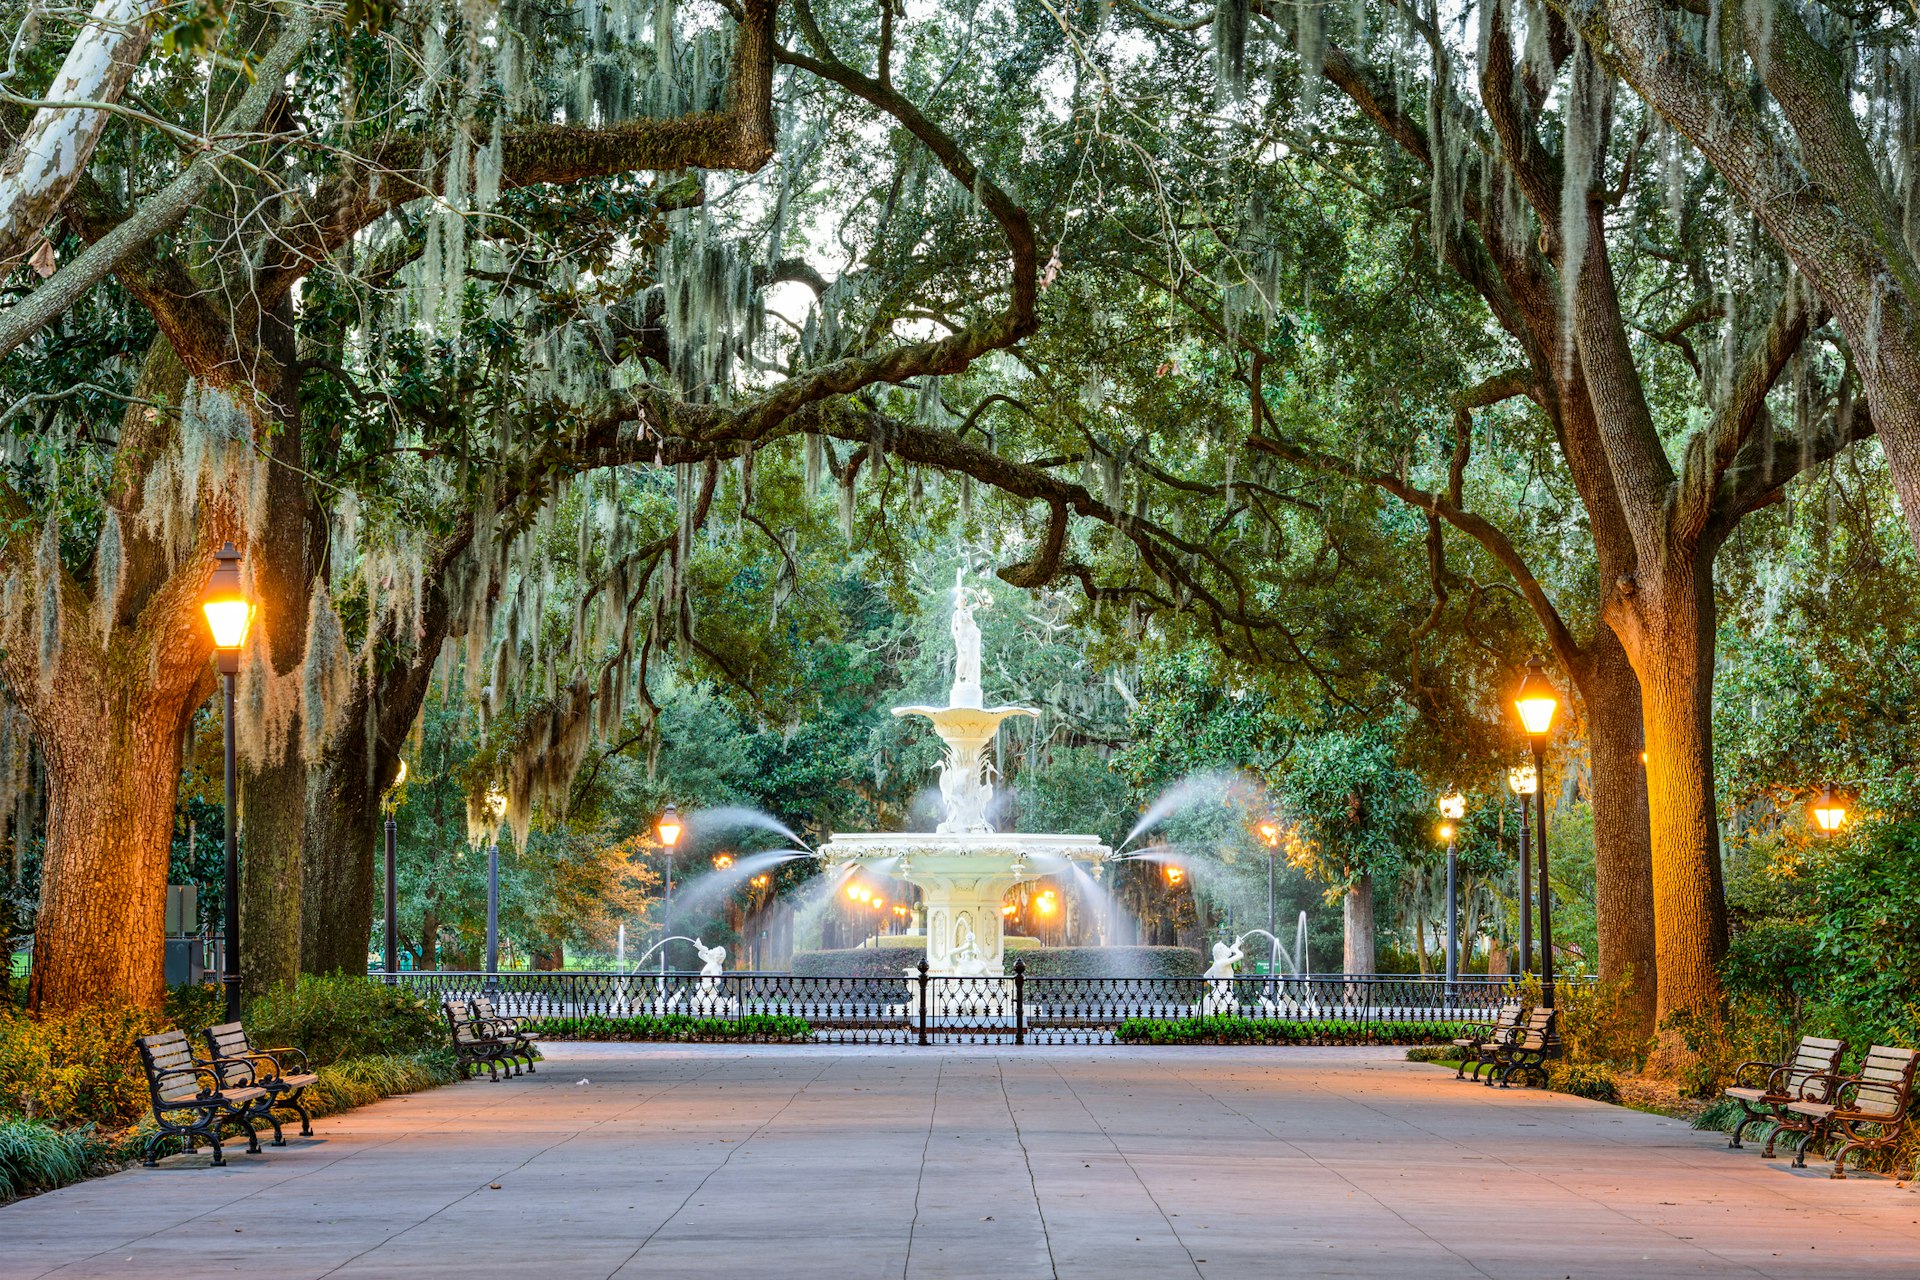 The famous white Forsyth Park fountain framed by an avenue of trees in Savannah